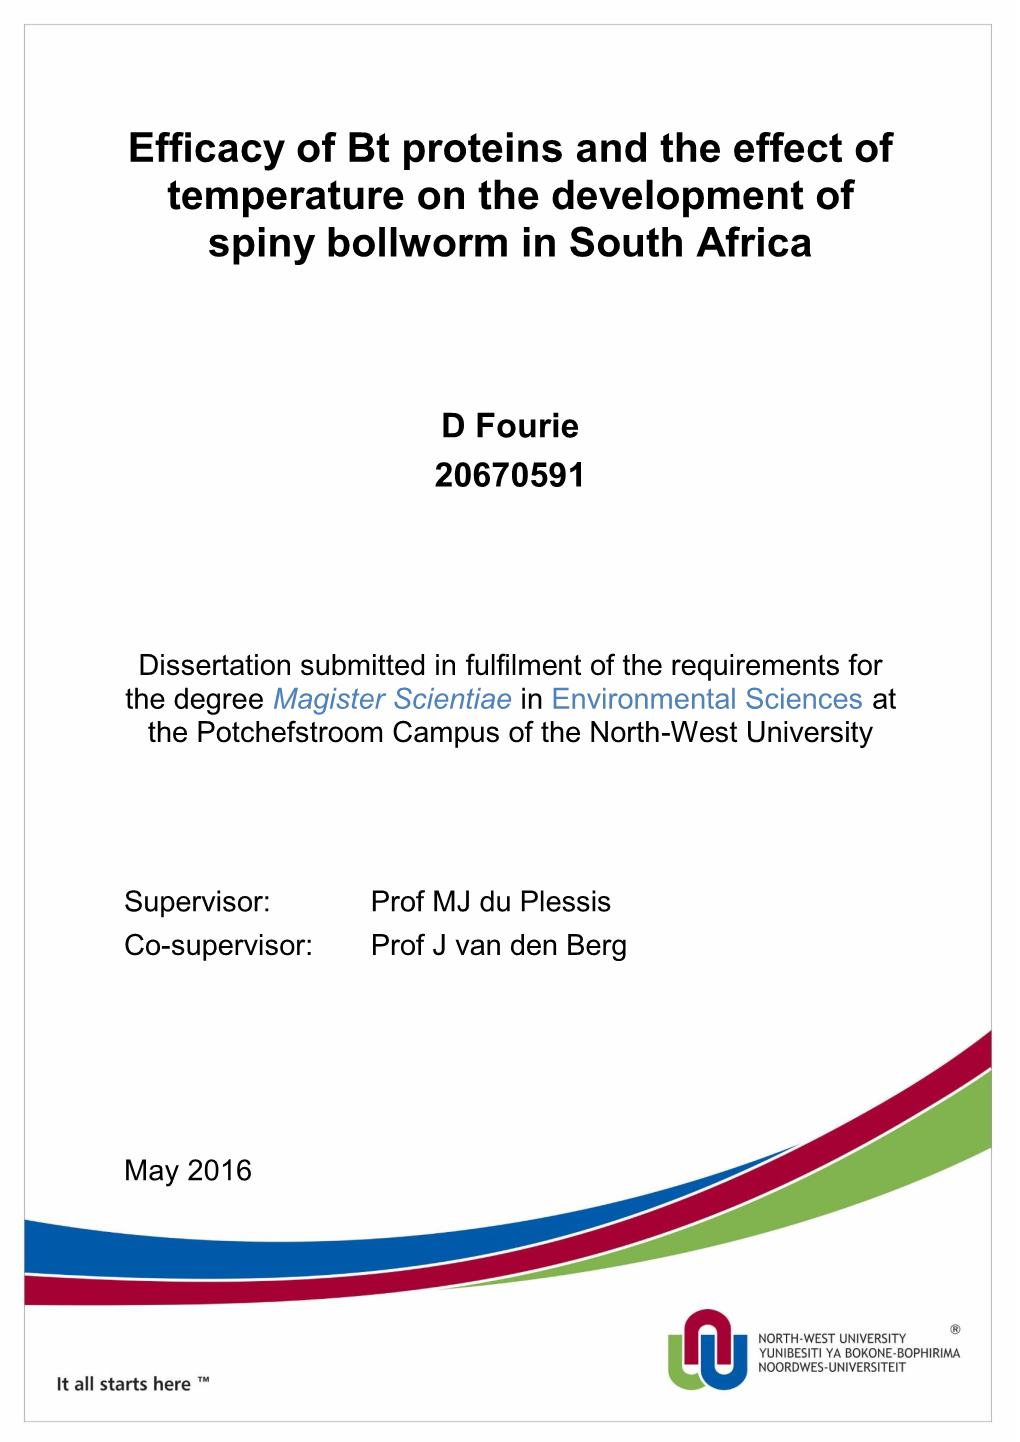 Efficacy of Bt Proteins and the Effect of Temperature on the Development of Spiny Bollworm in South Africa